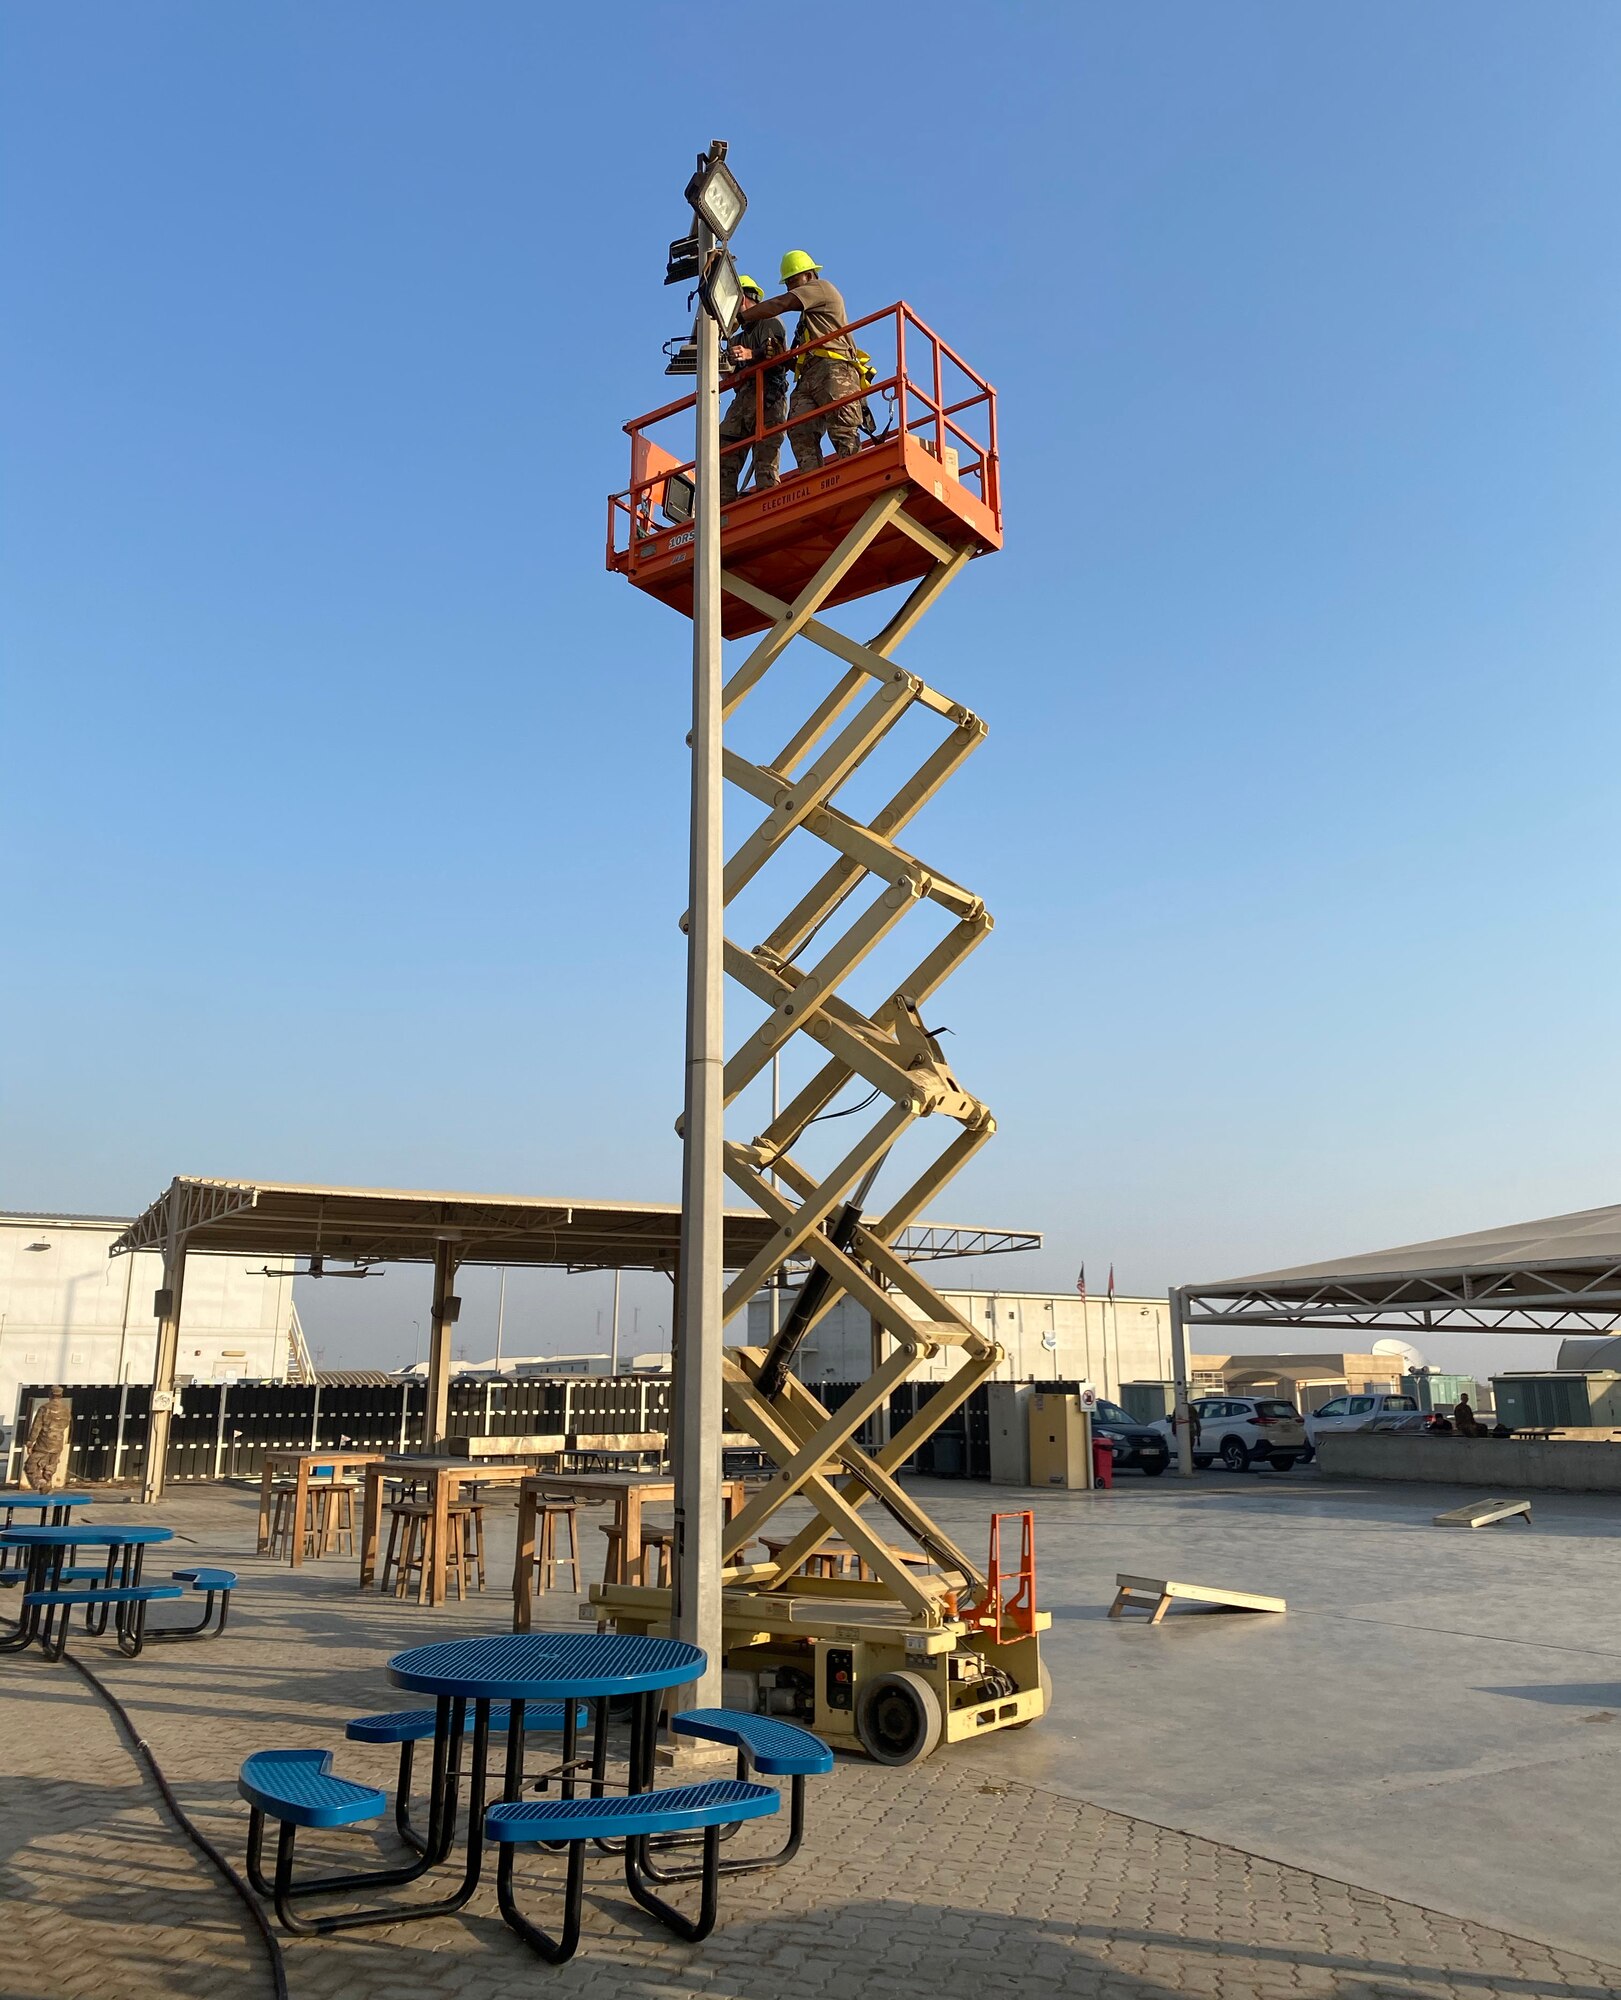 Members of the 380th Expeditionary Civil Engineer Squadron repair a light tower, July 7, 2020, at Al Dhafra Air Base, United Arab Emirates. The squadron is working on numerous projects to improve facilities and quality of life on base. (U.S. Air Force photo by Tech. Sgt. Melissa Harvey)